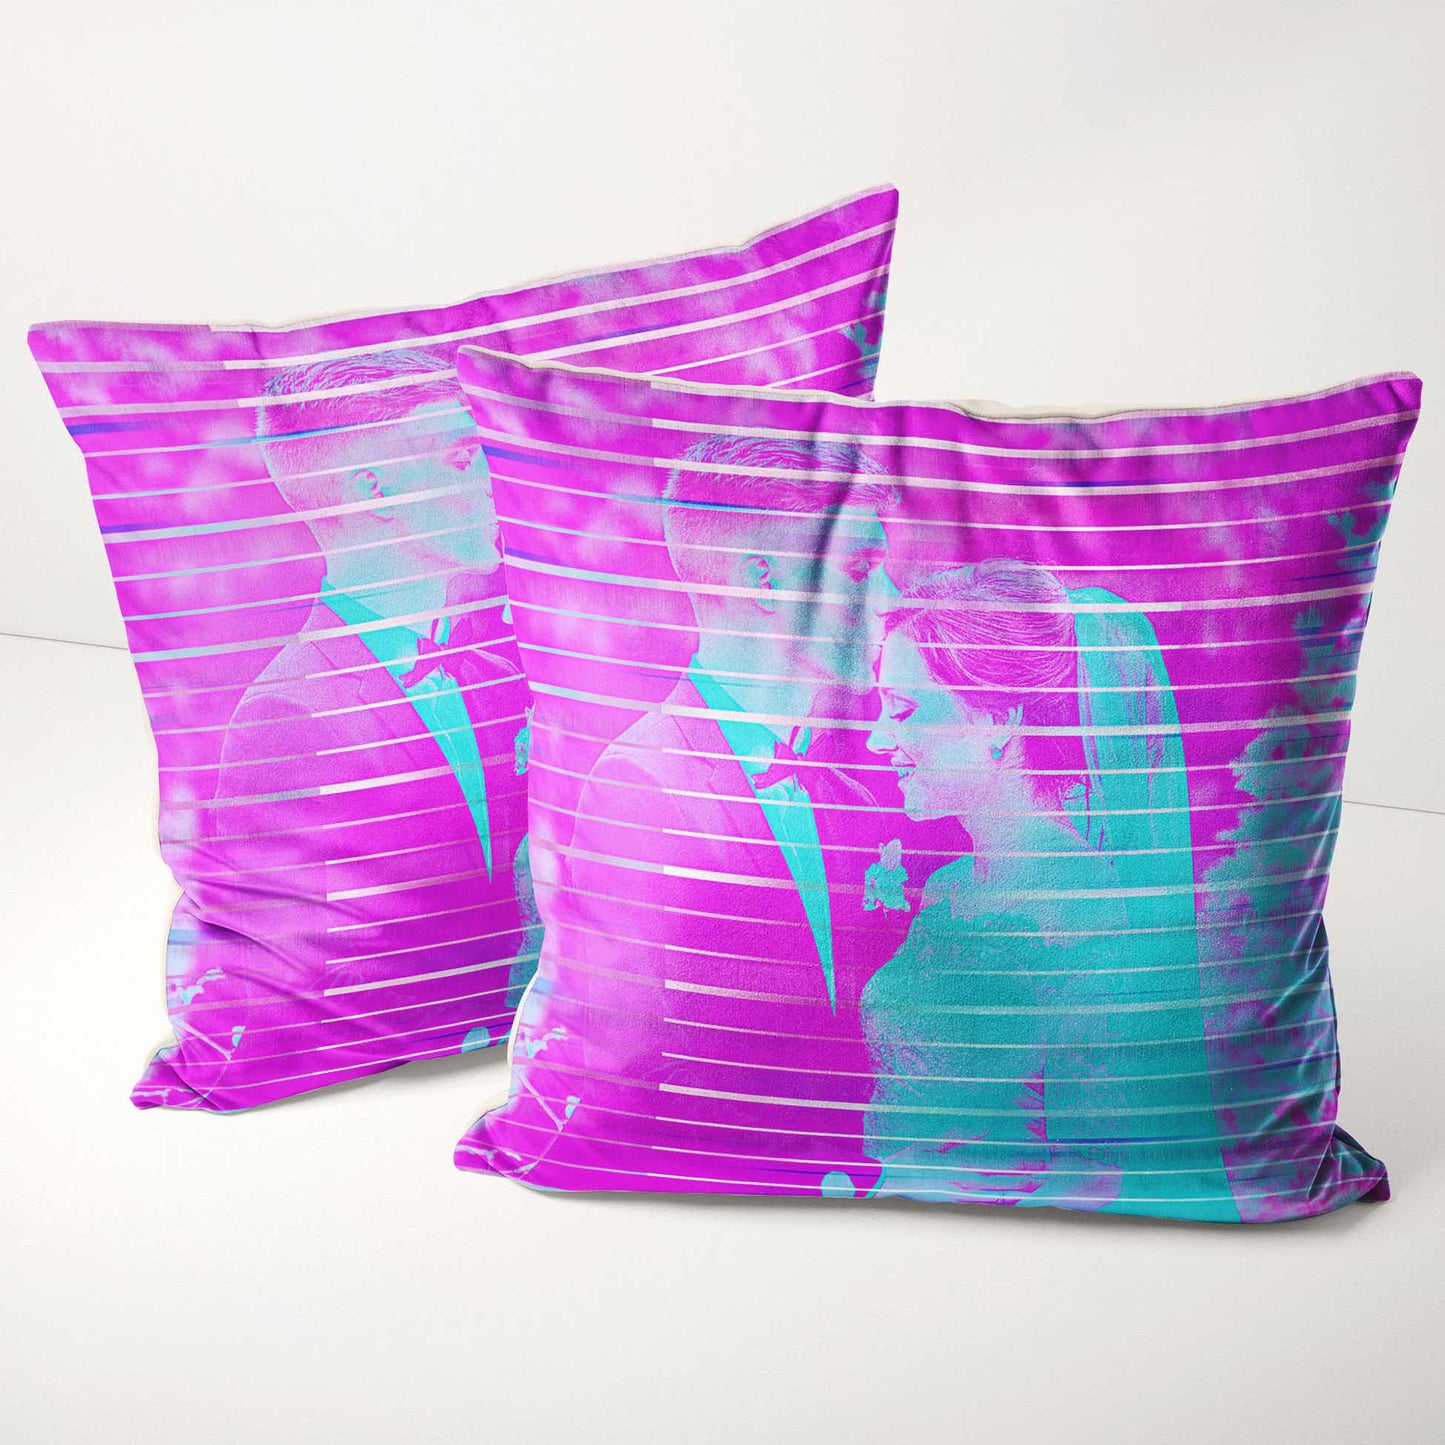 Revitalize your home with the Personalised Purple and Blue Cushion. Its vibrant and vivid tones create a modern and elegant look that catches the eye. Made from soft velvet, this cushion provides a plush and comfortable feel